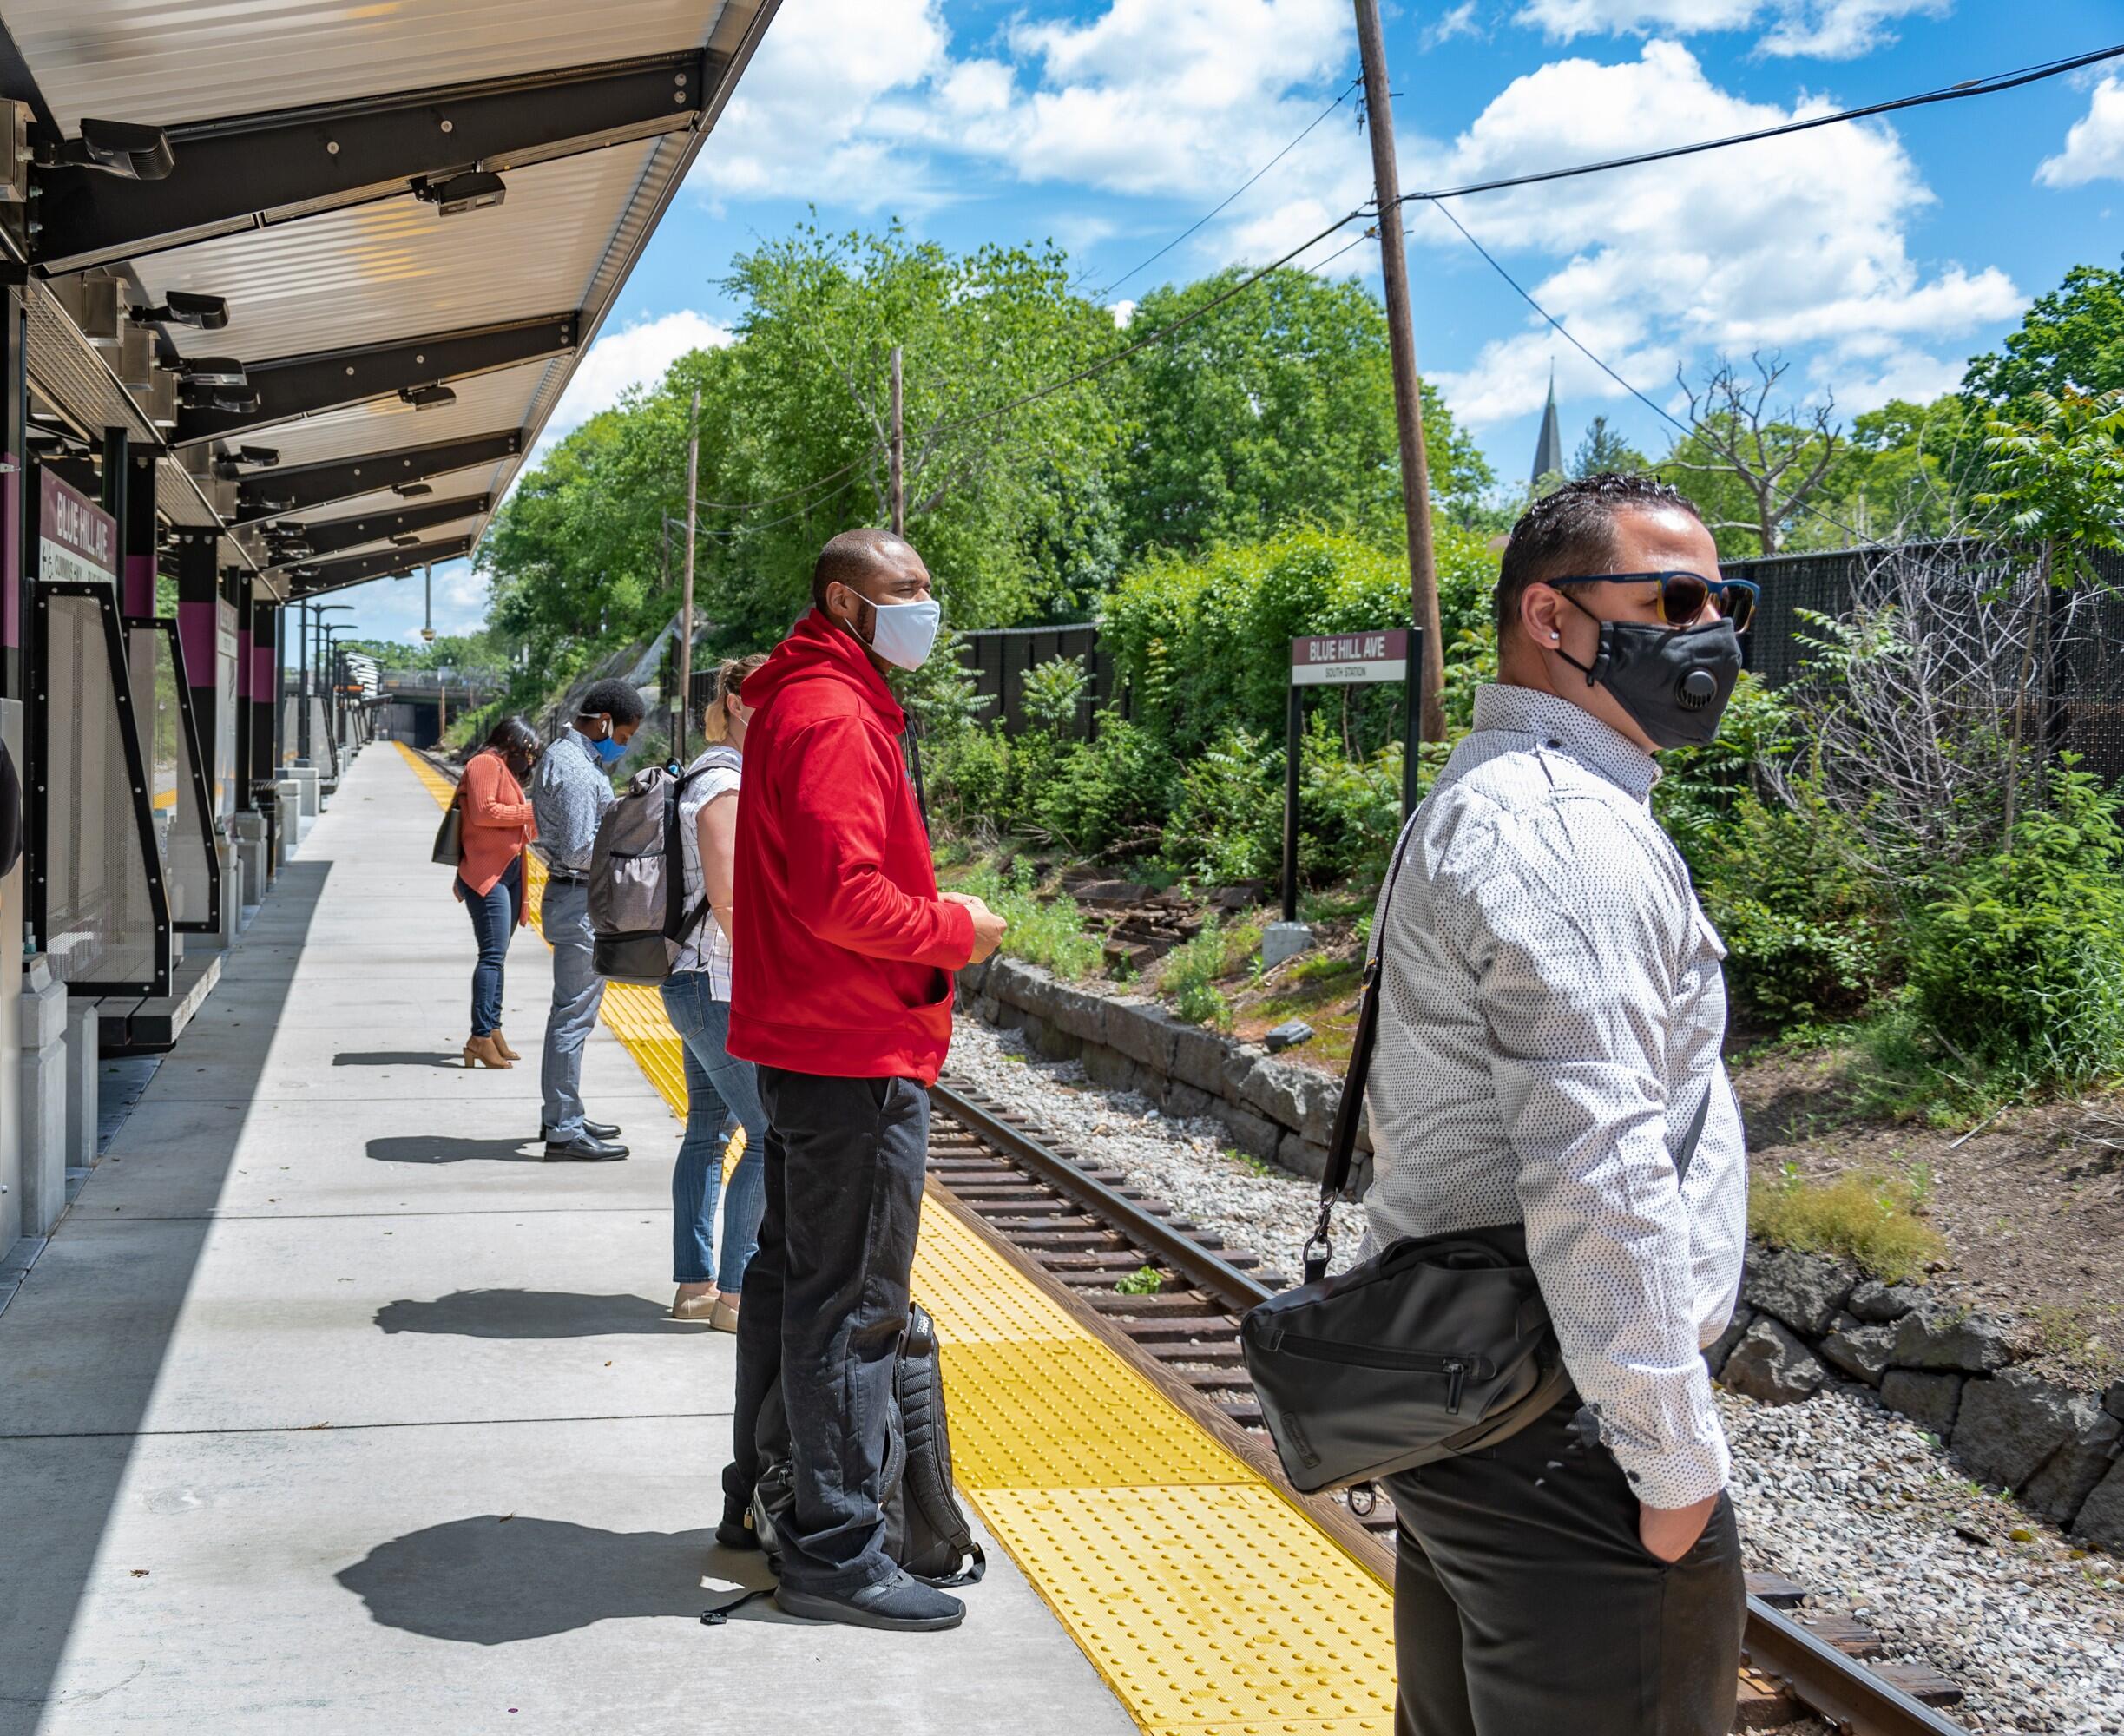 At the Blue Hill Ave Commuter Rail station, riders wearing masks stand on the platform, waiting for the train.